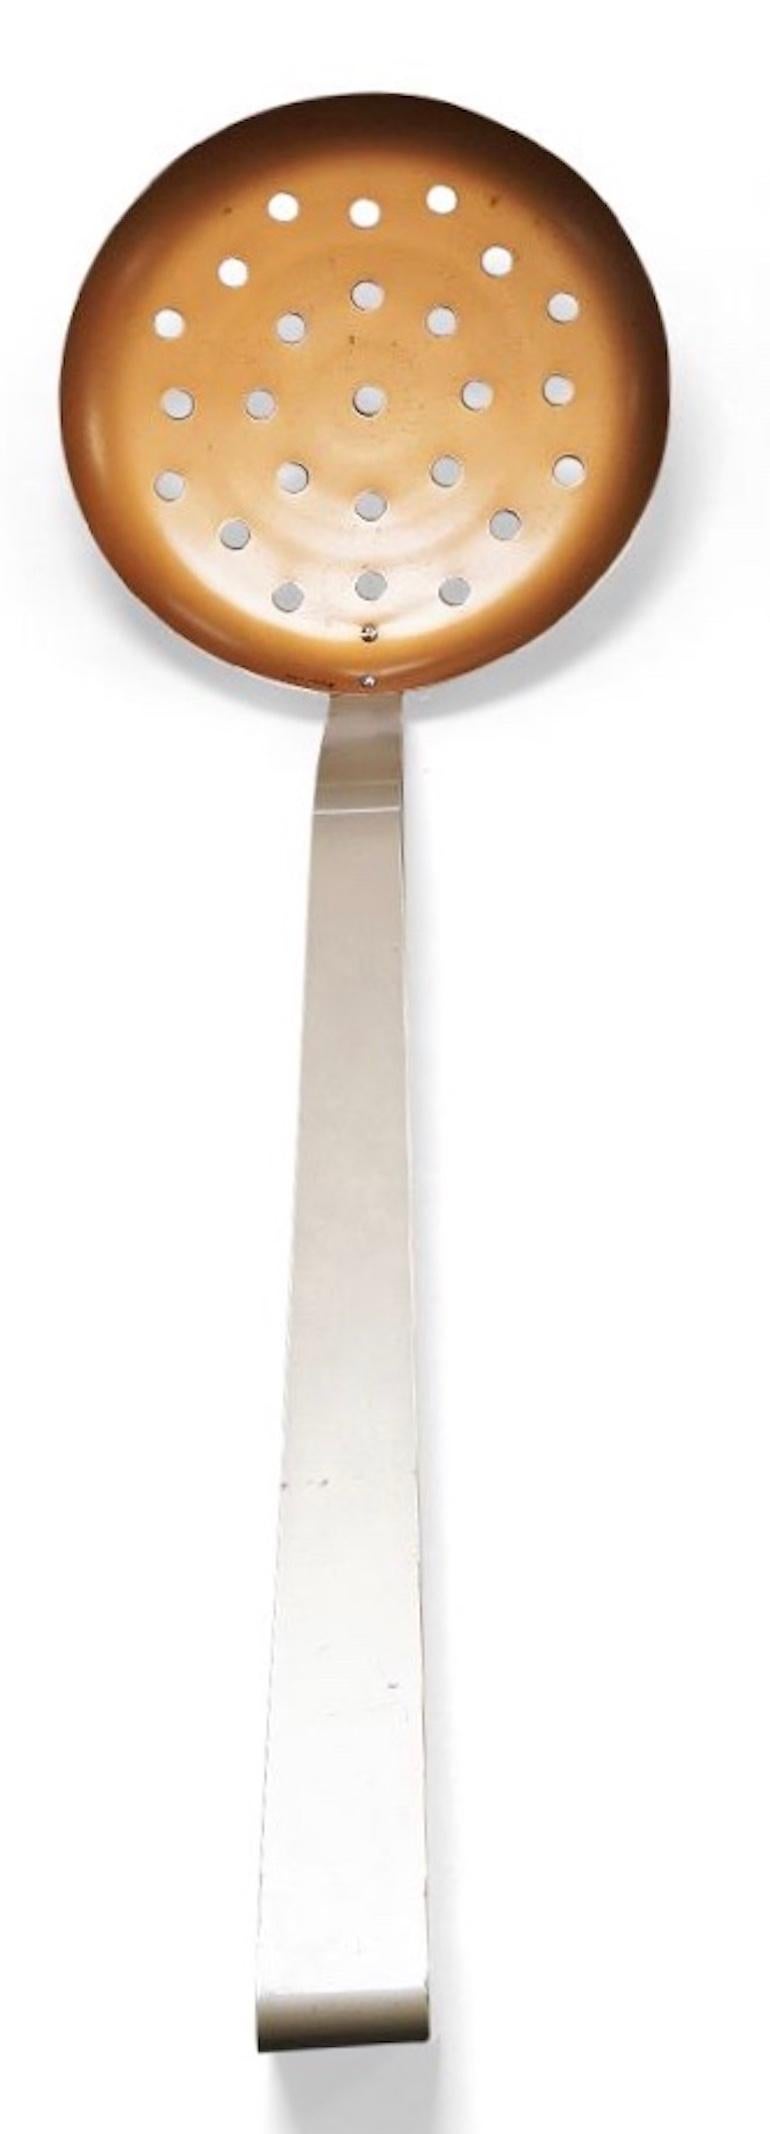 Powder-Coated Curtis Jeré Giant Pierced Spoon Wall Sculpture Signed and Dated 1992 For Sale